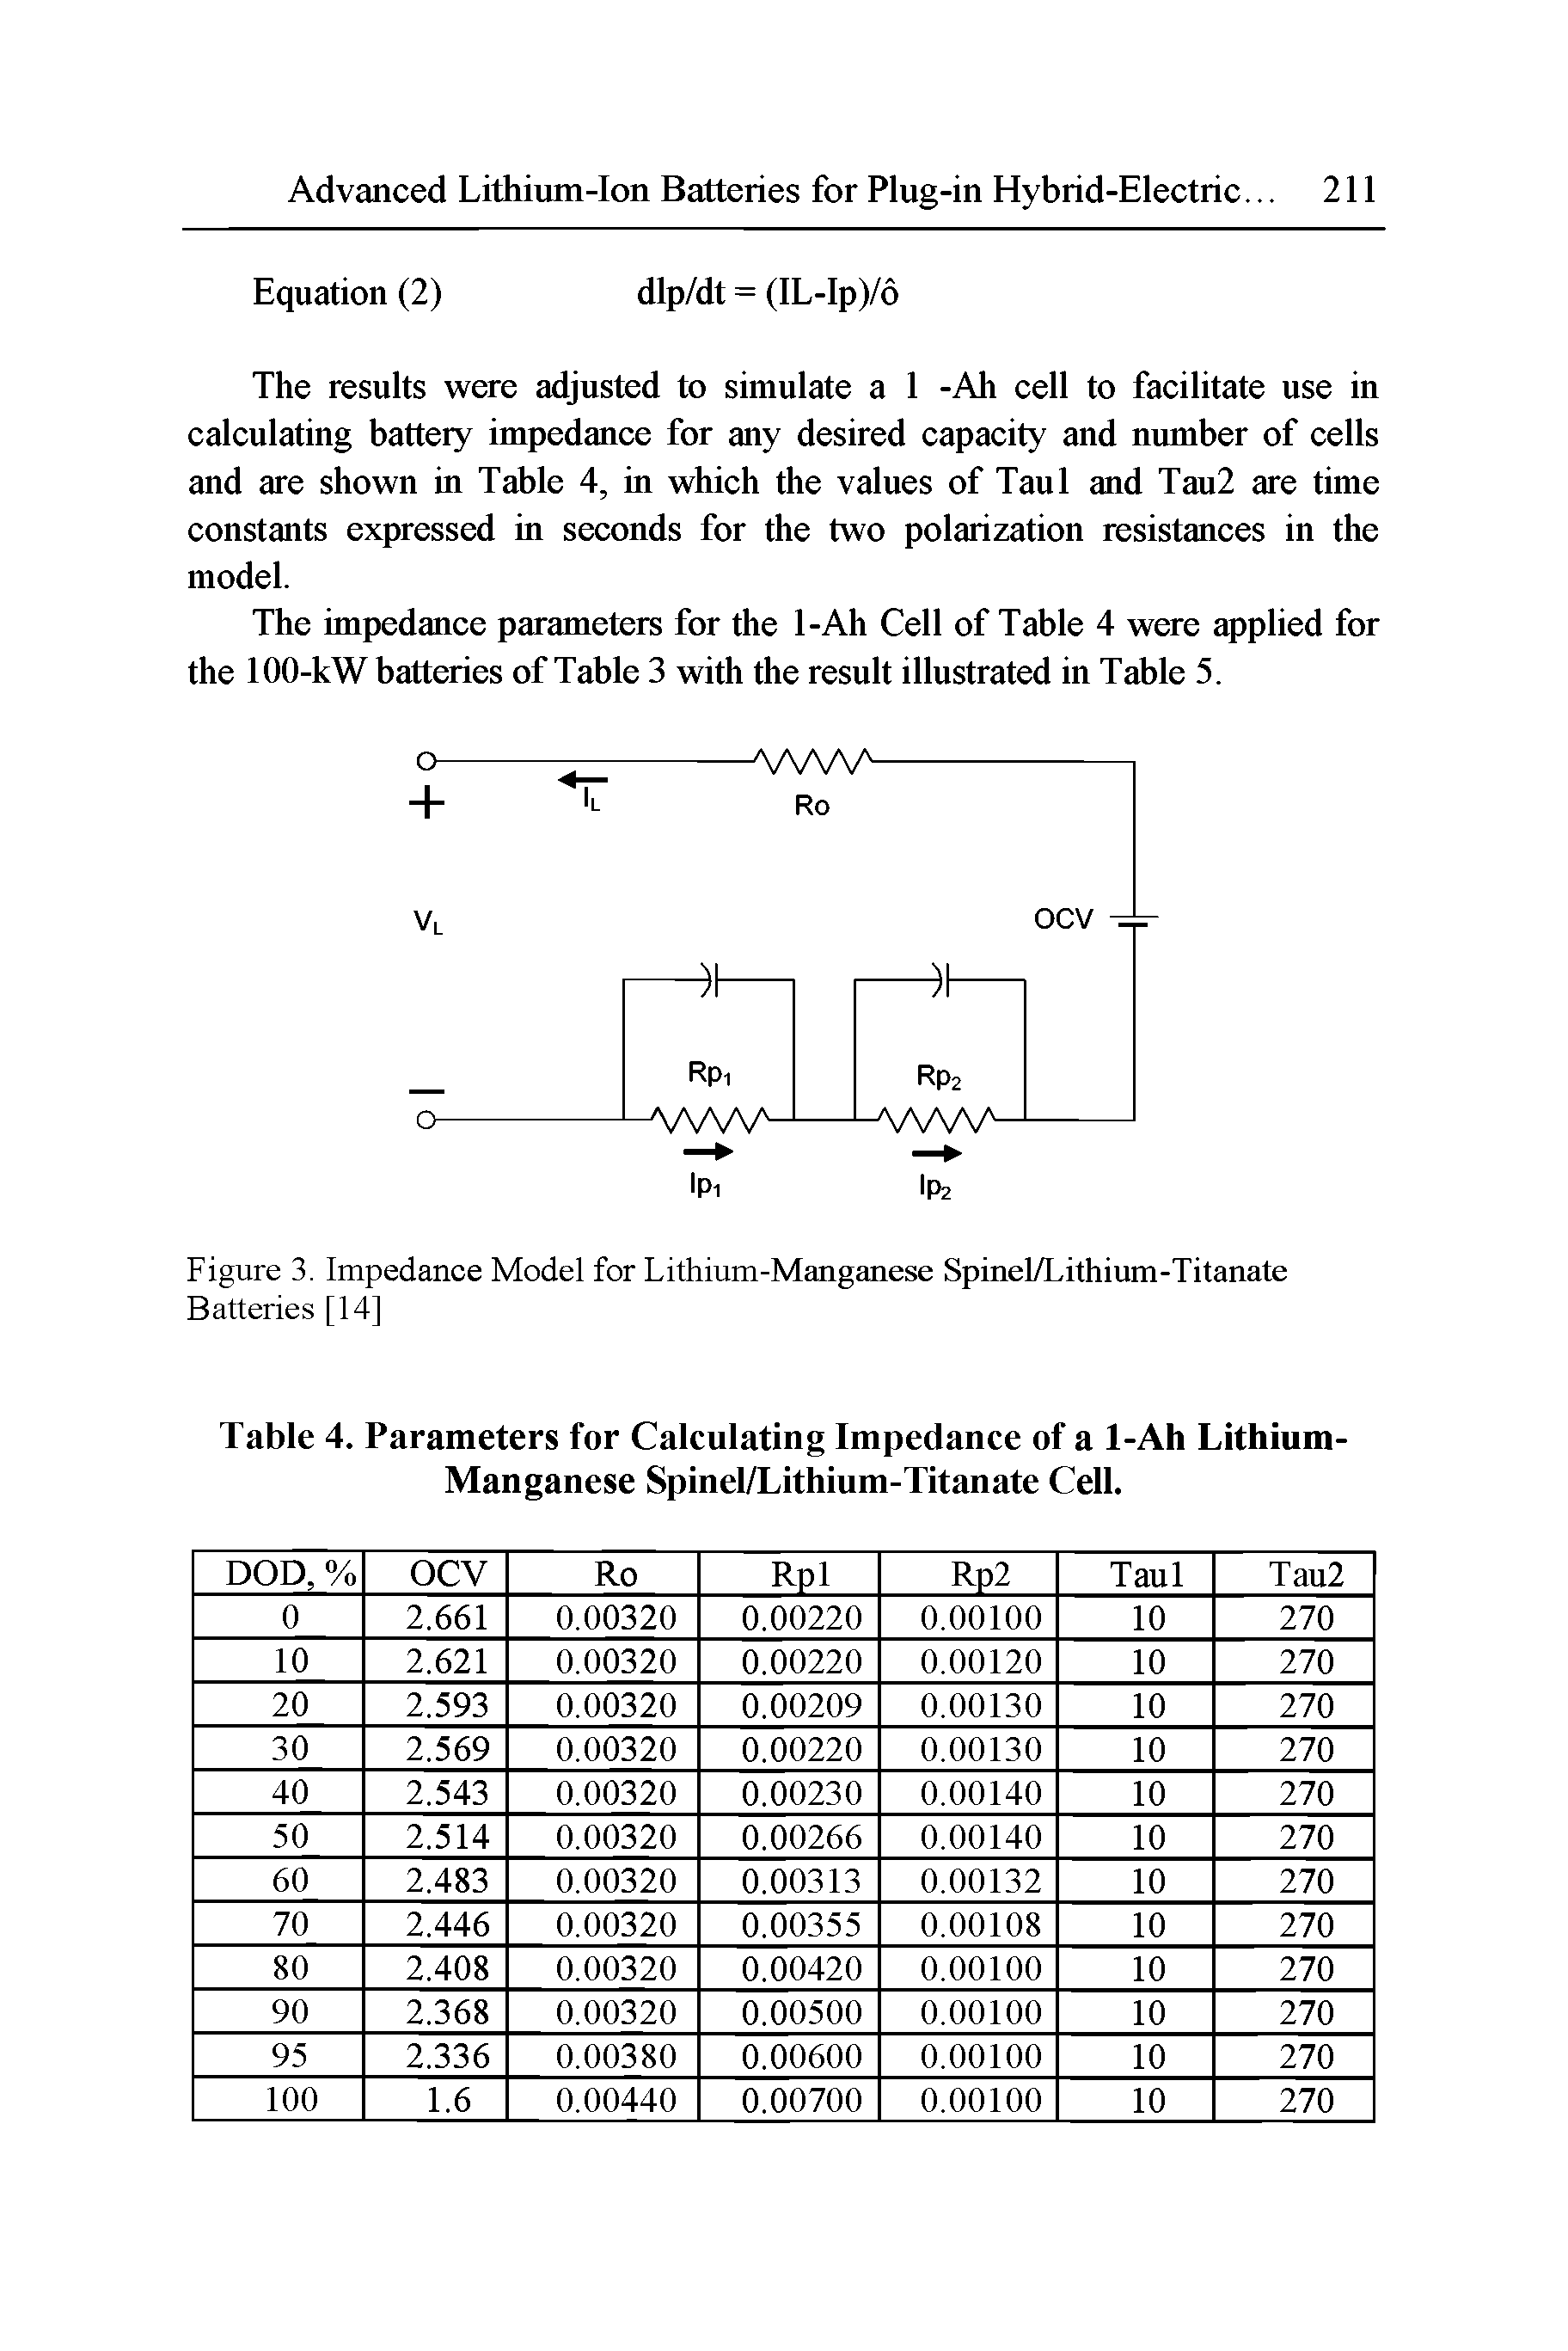 Table 4. Parameters for Calculating Impedance of a 1-Ah Lithium-Manganese Spinel/Lithium-Titanate Cell.